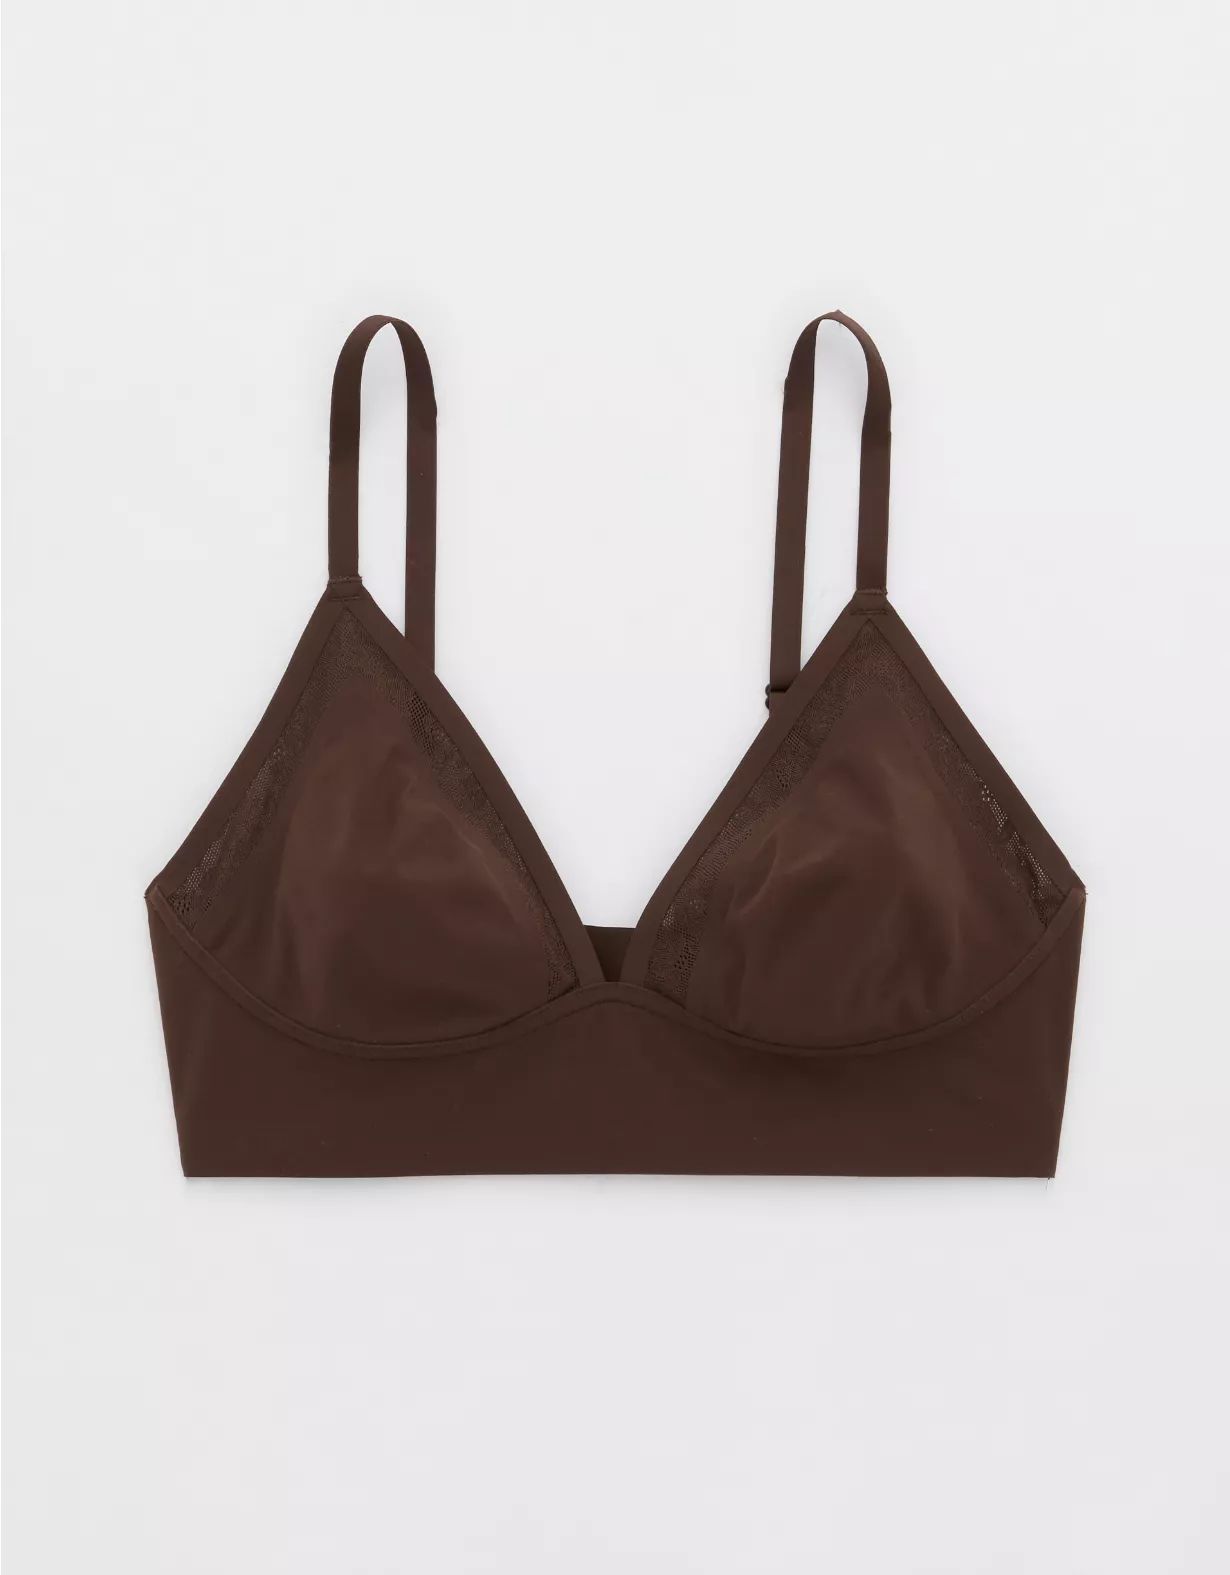 SMOOTHEZ Lace Triangle Bralette | Aerie